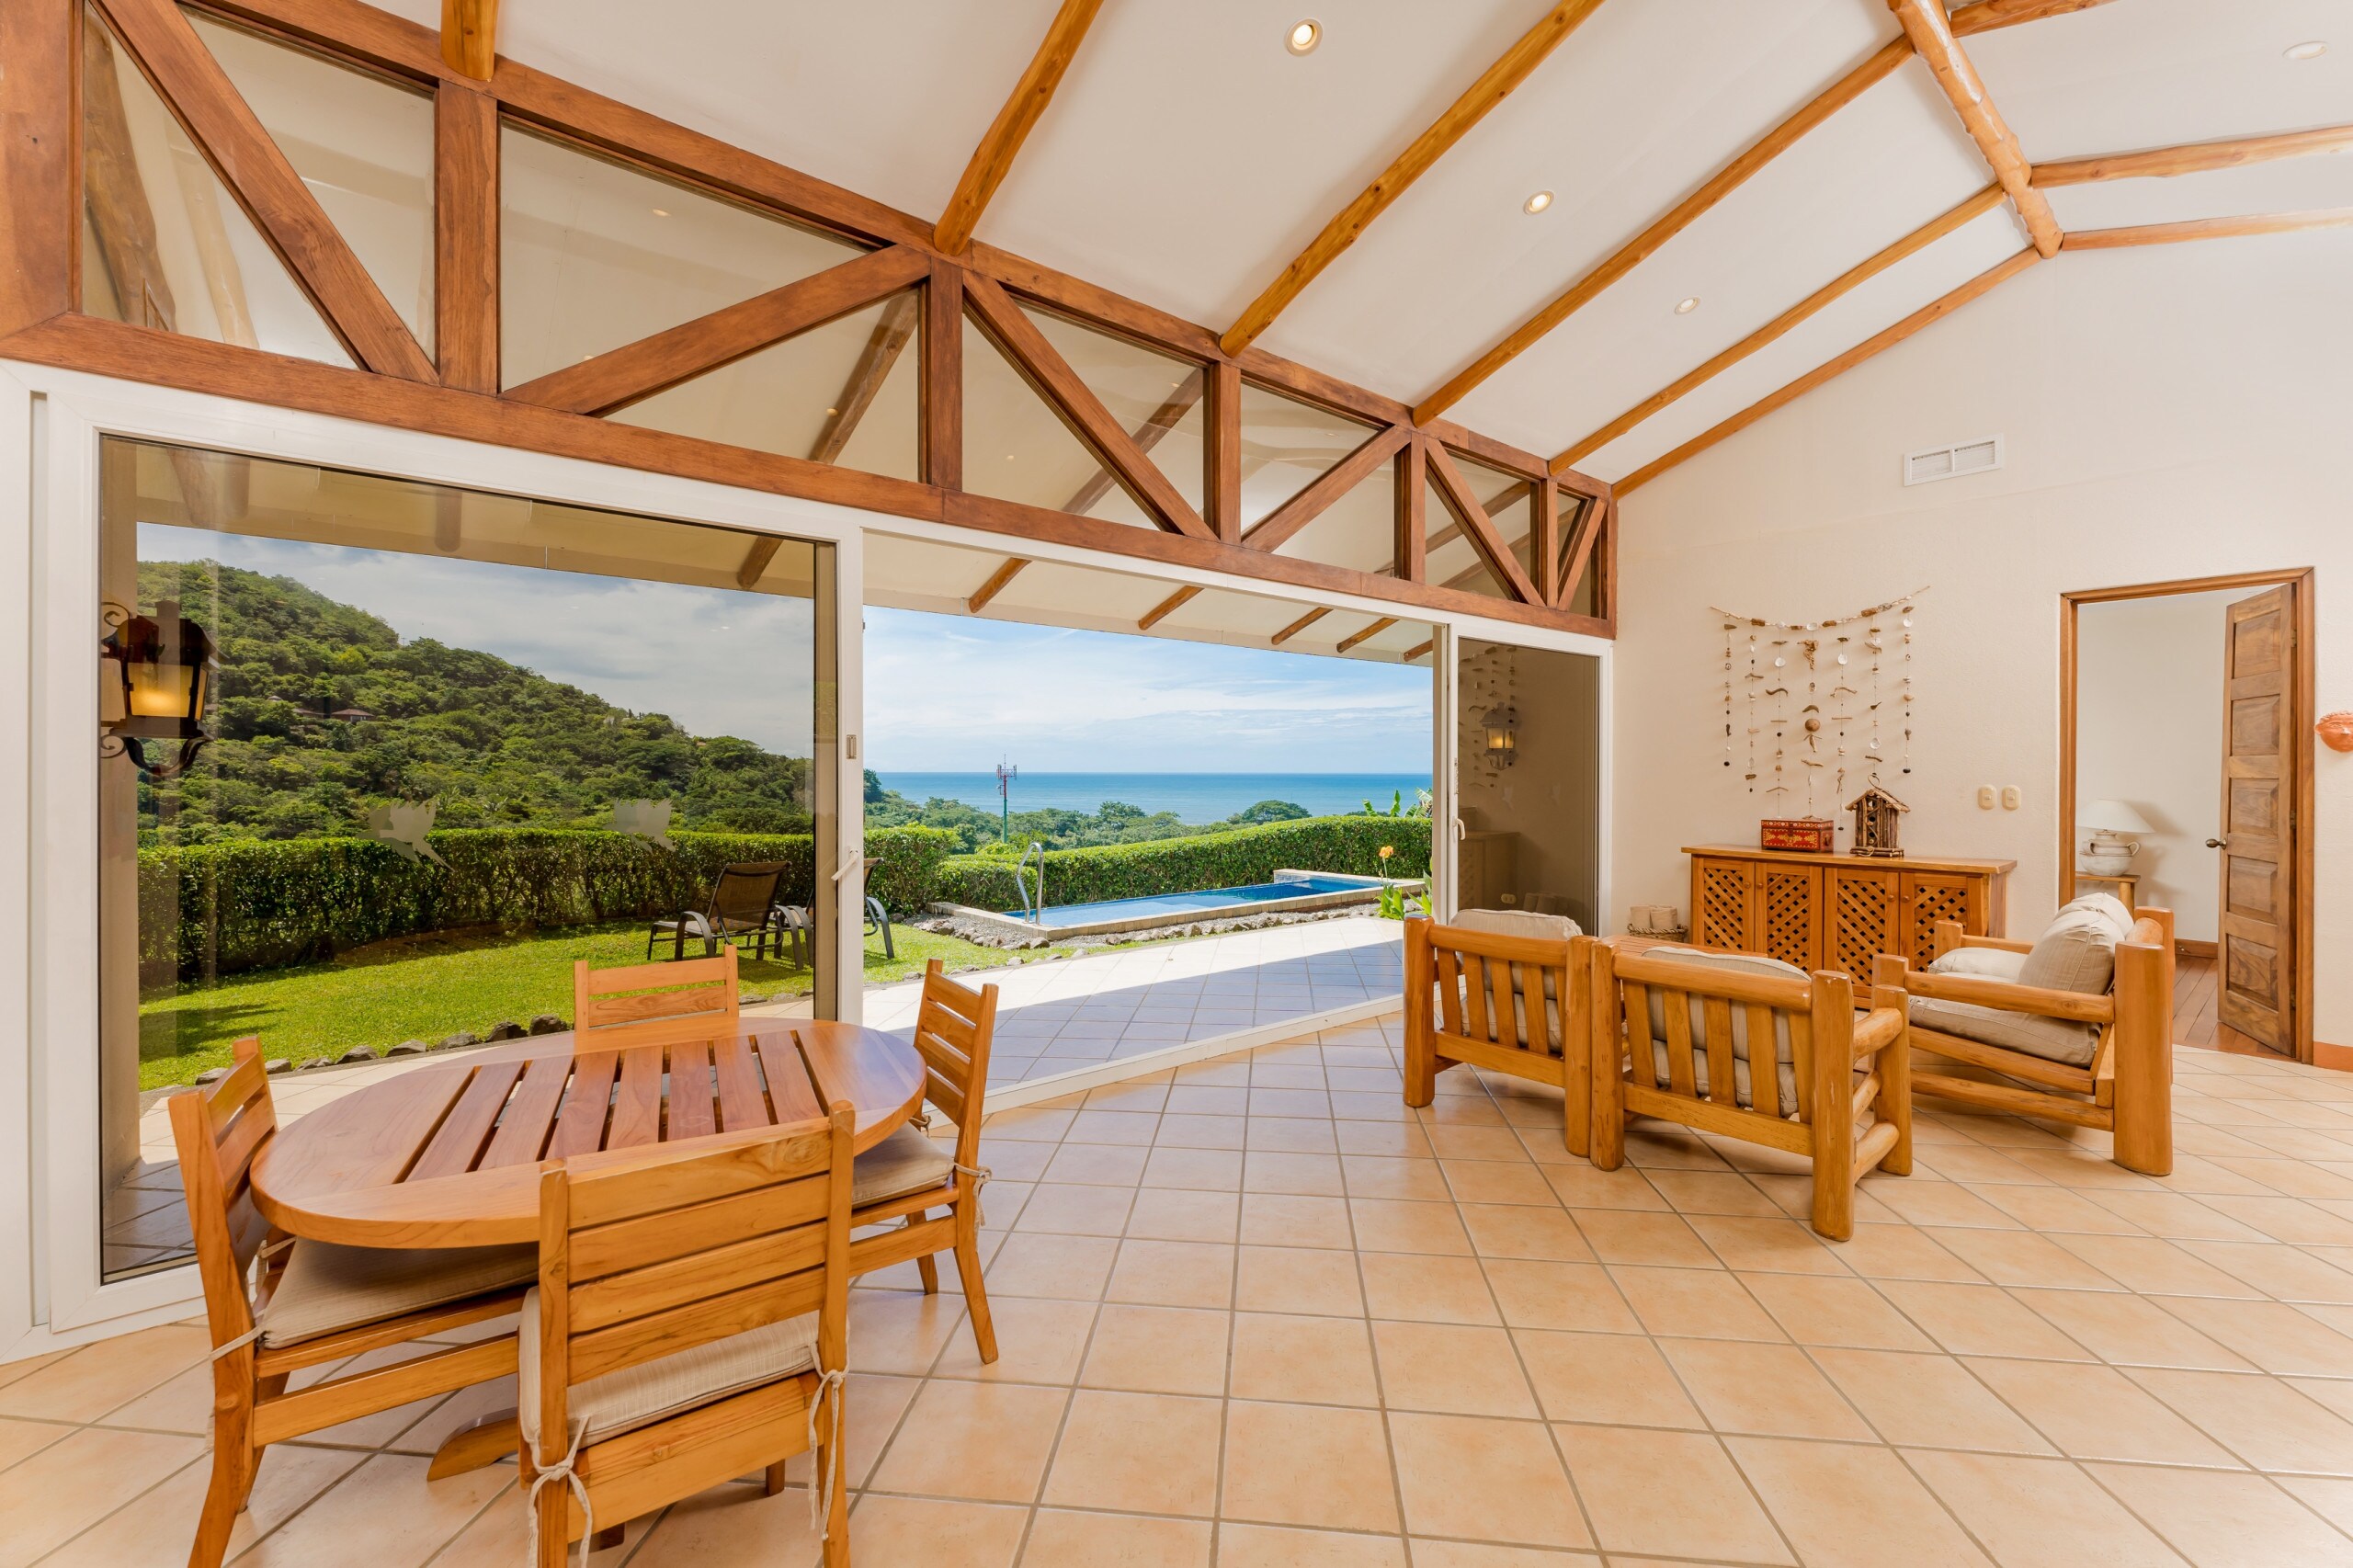 Carao, charming, private, and rustic-style 3 bedroom villa in the middle of nature